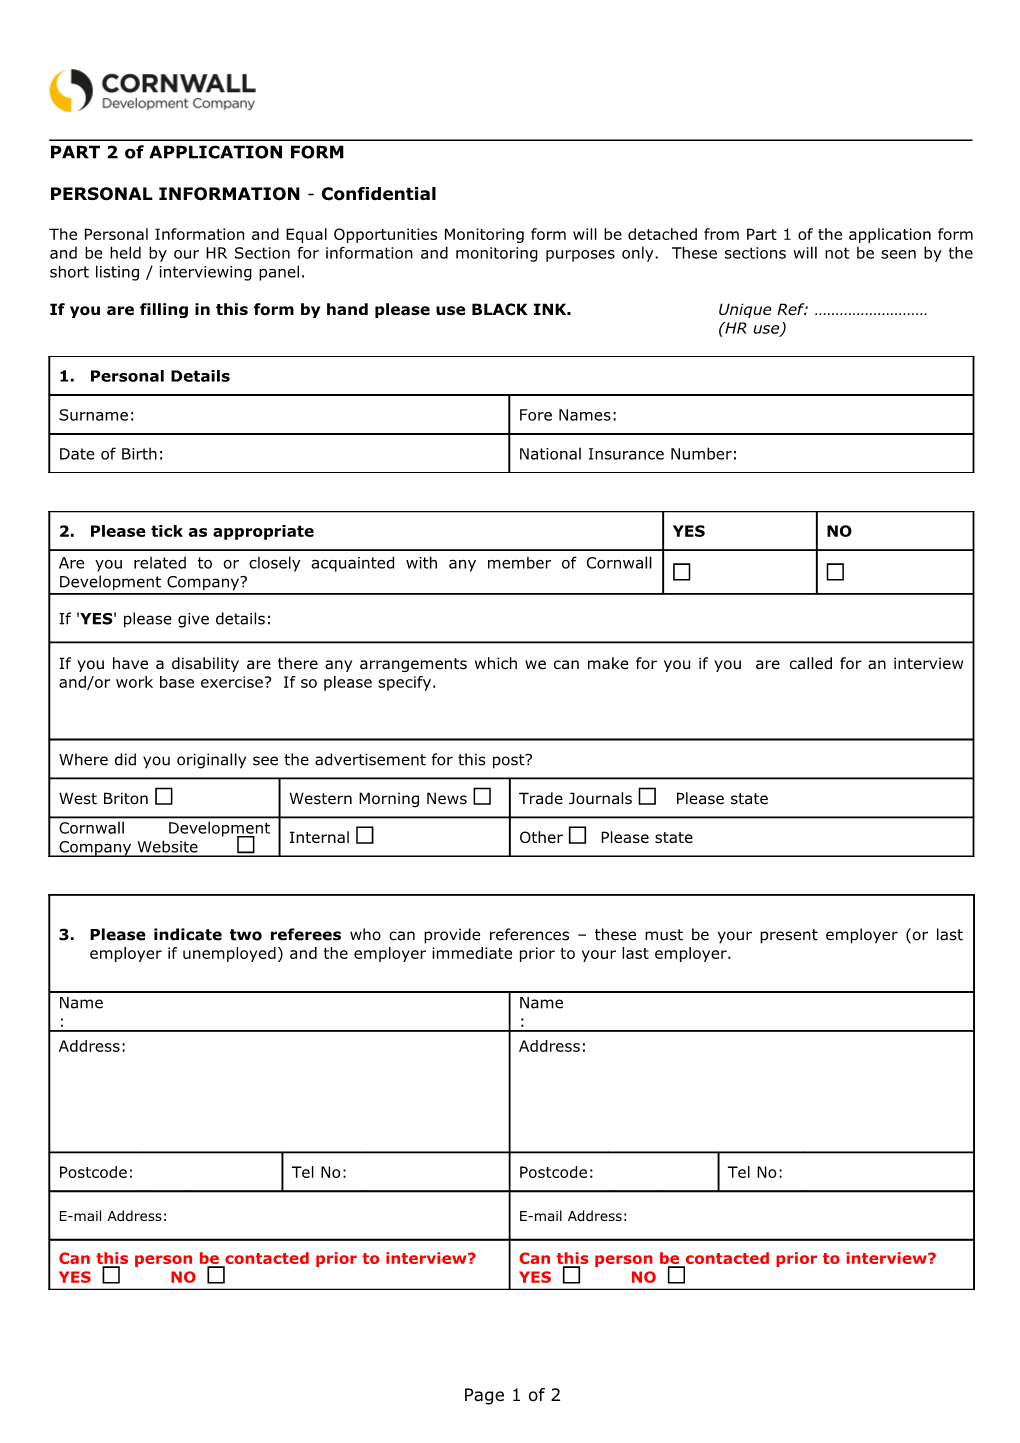 PART 2 of APPLICATION FORM